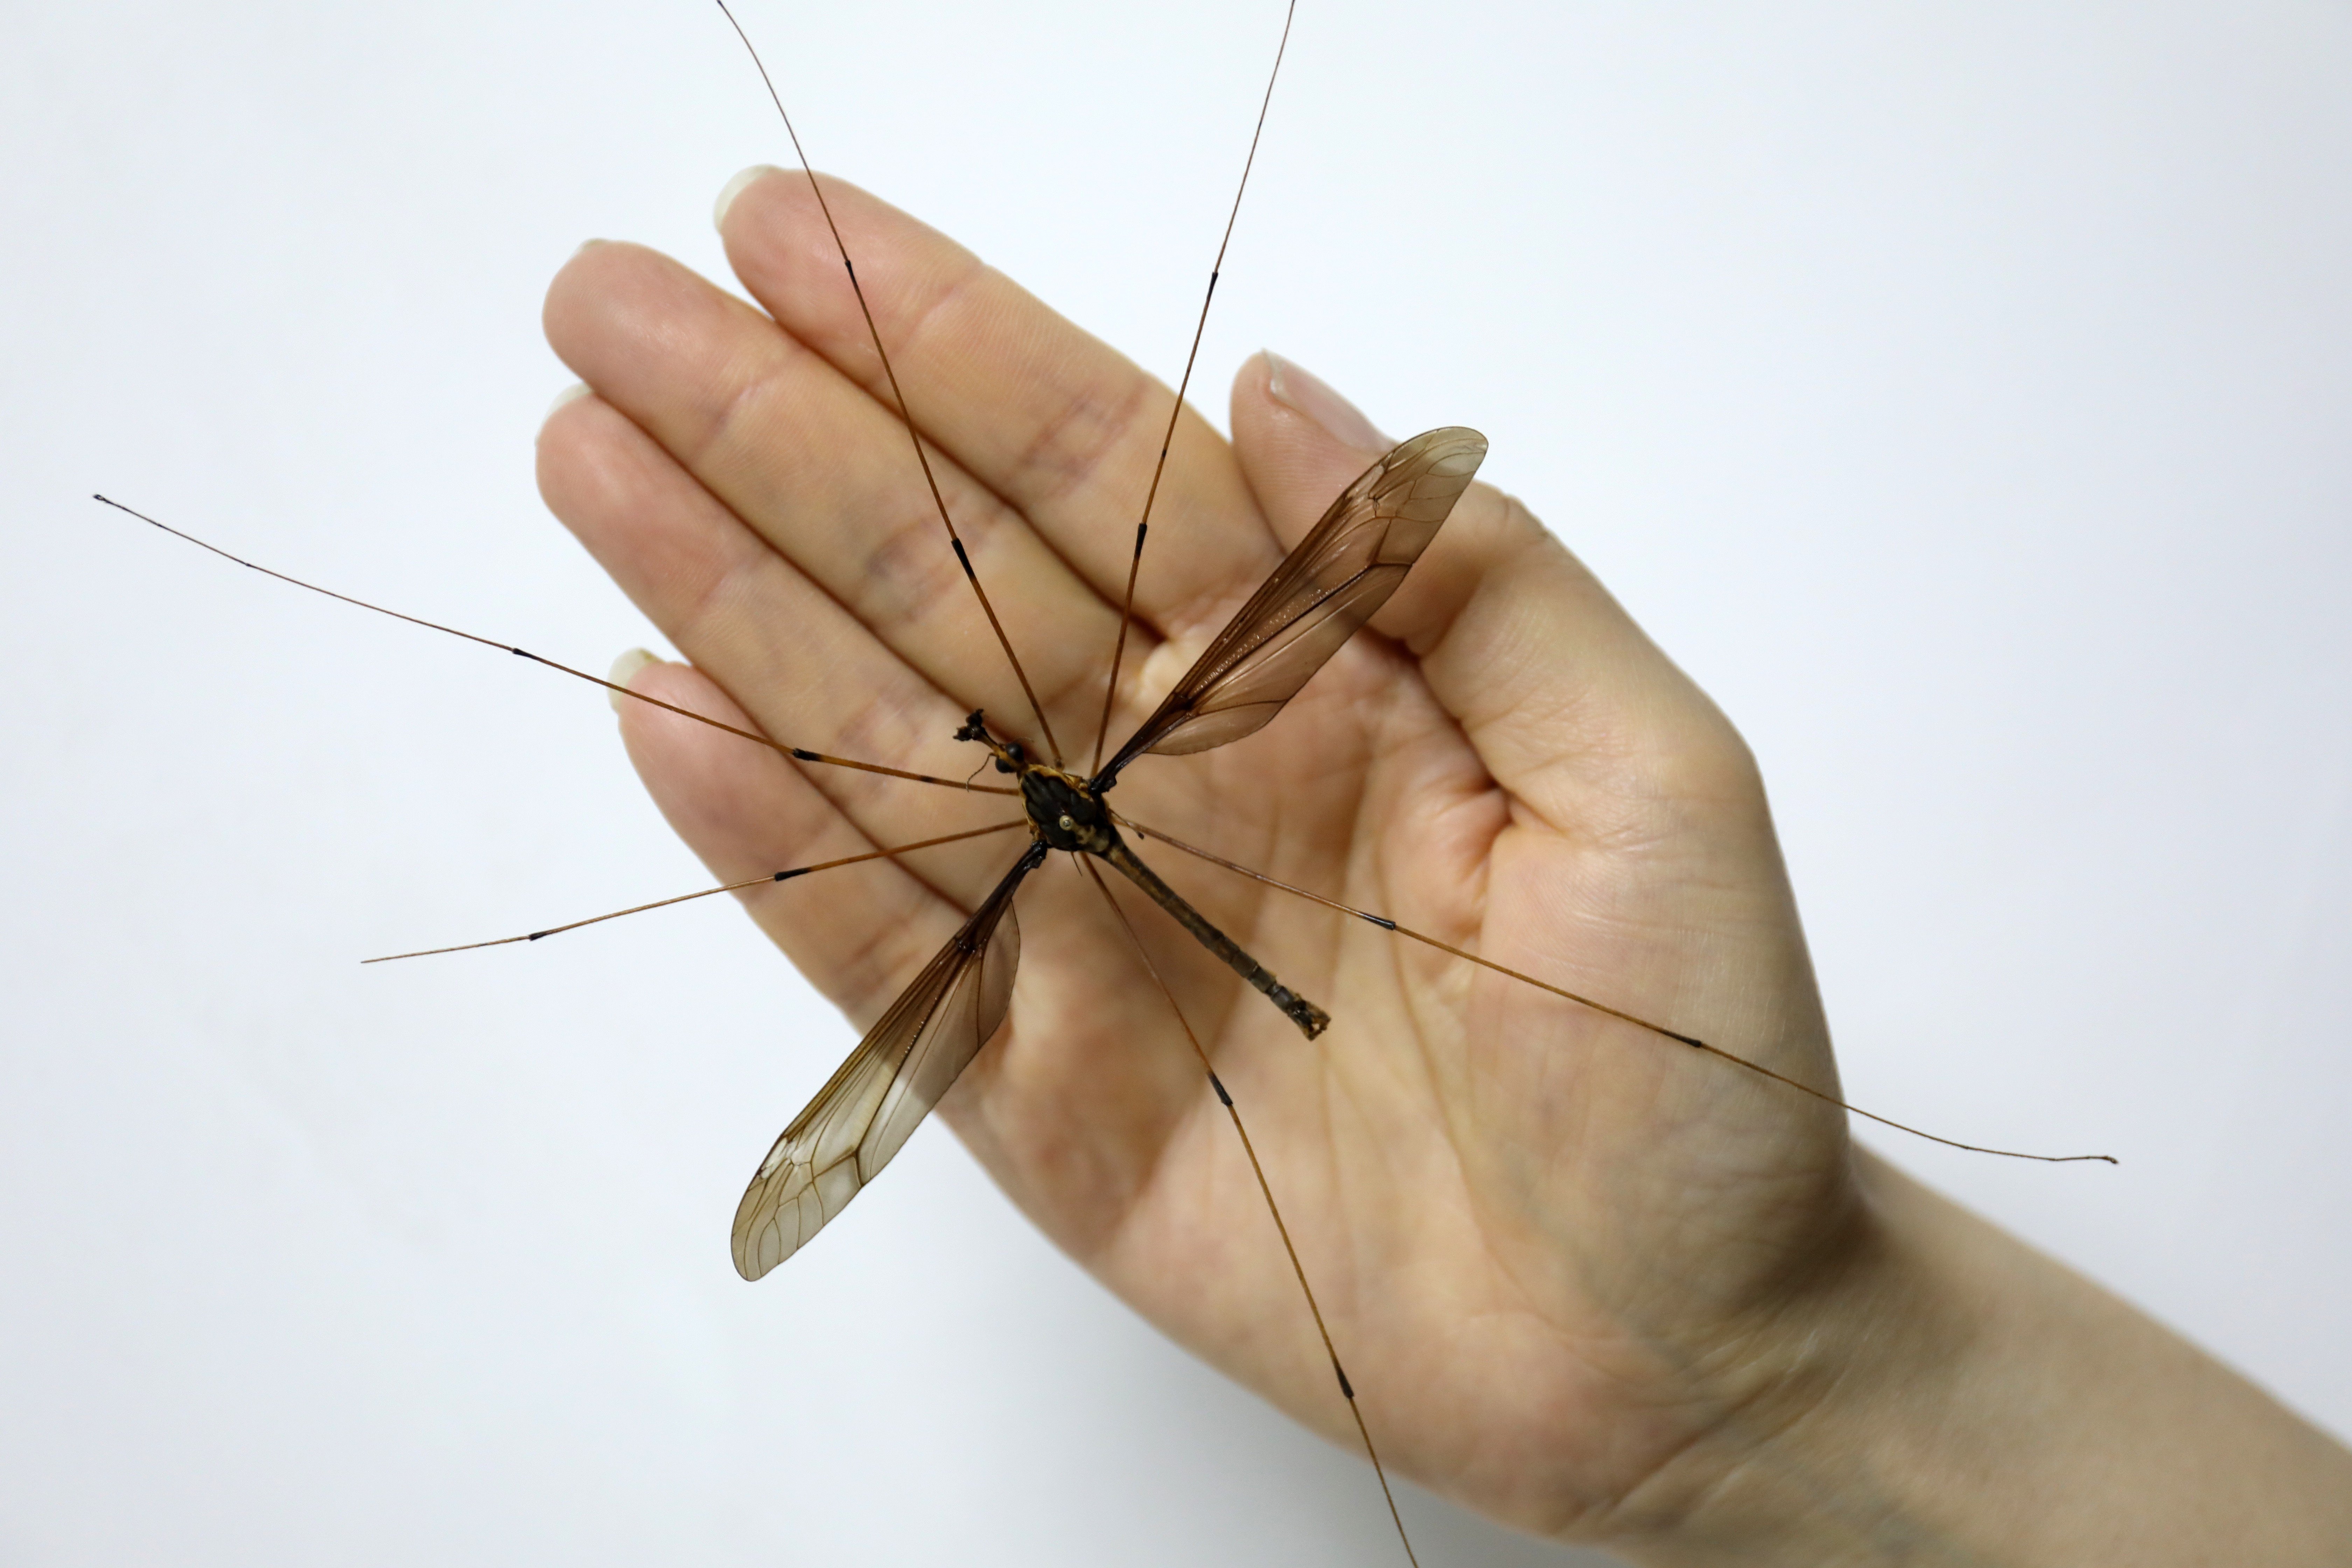 How big is the largest mosquito?